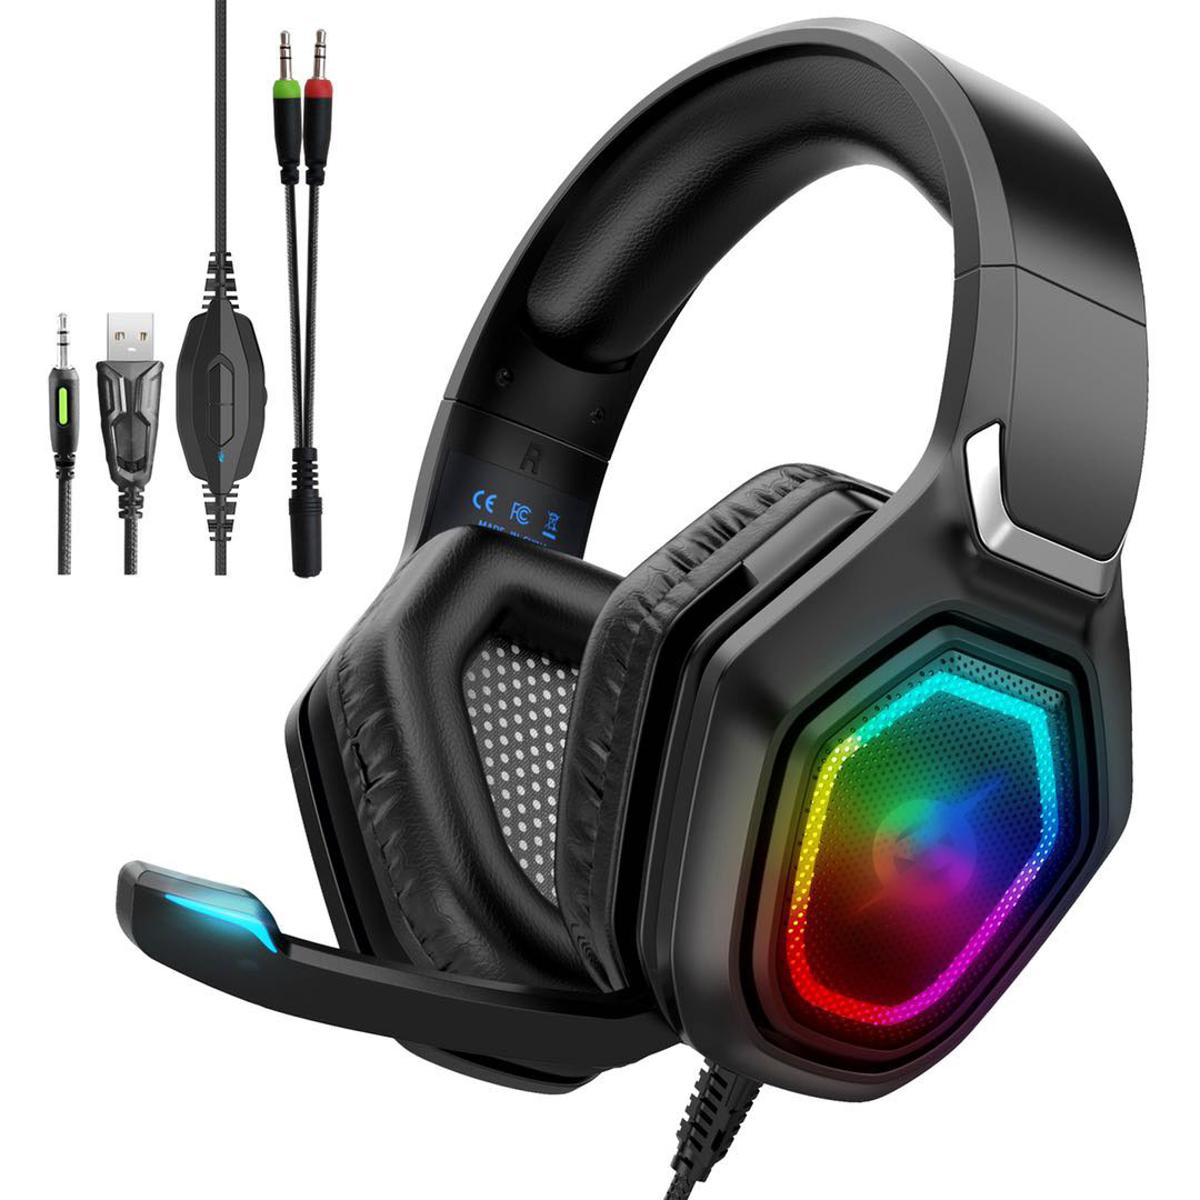 FASTER Blubolt BG-300 Surrounding Sound Gaming Headset with Noise Cancelling Microphone for PC and Mobile